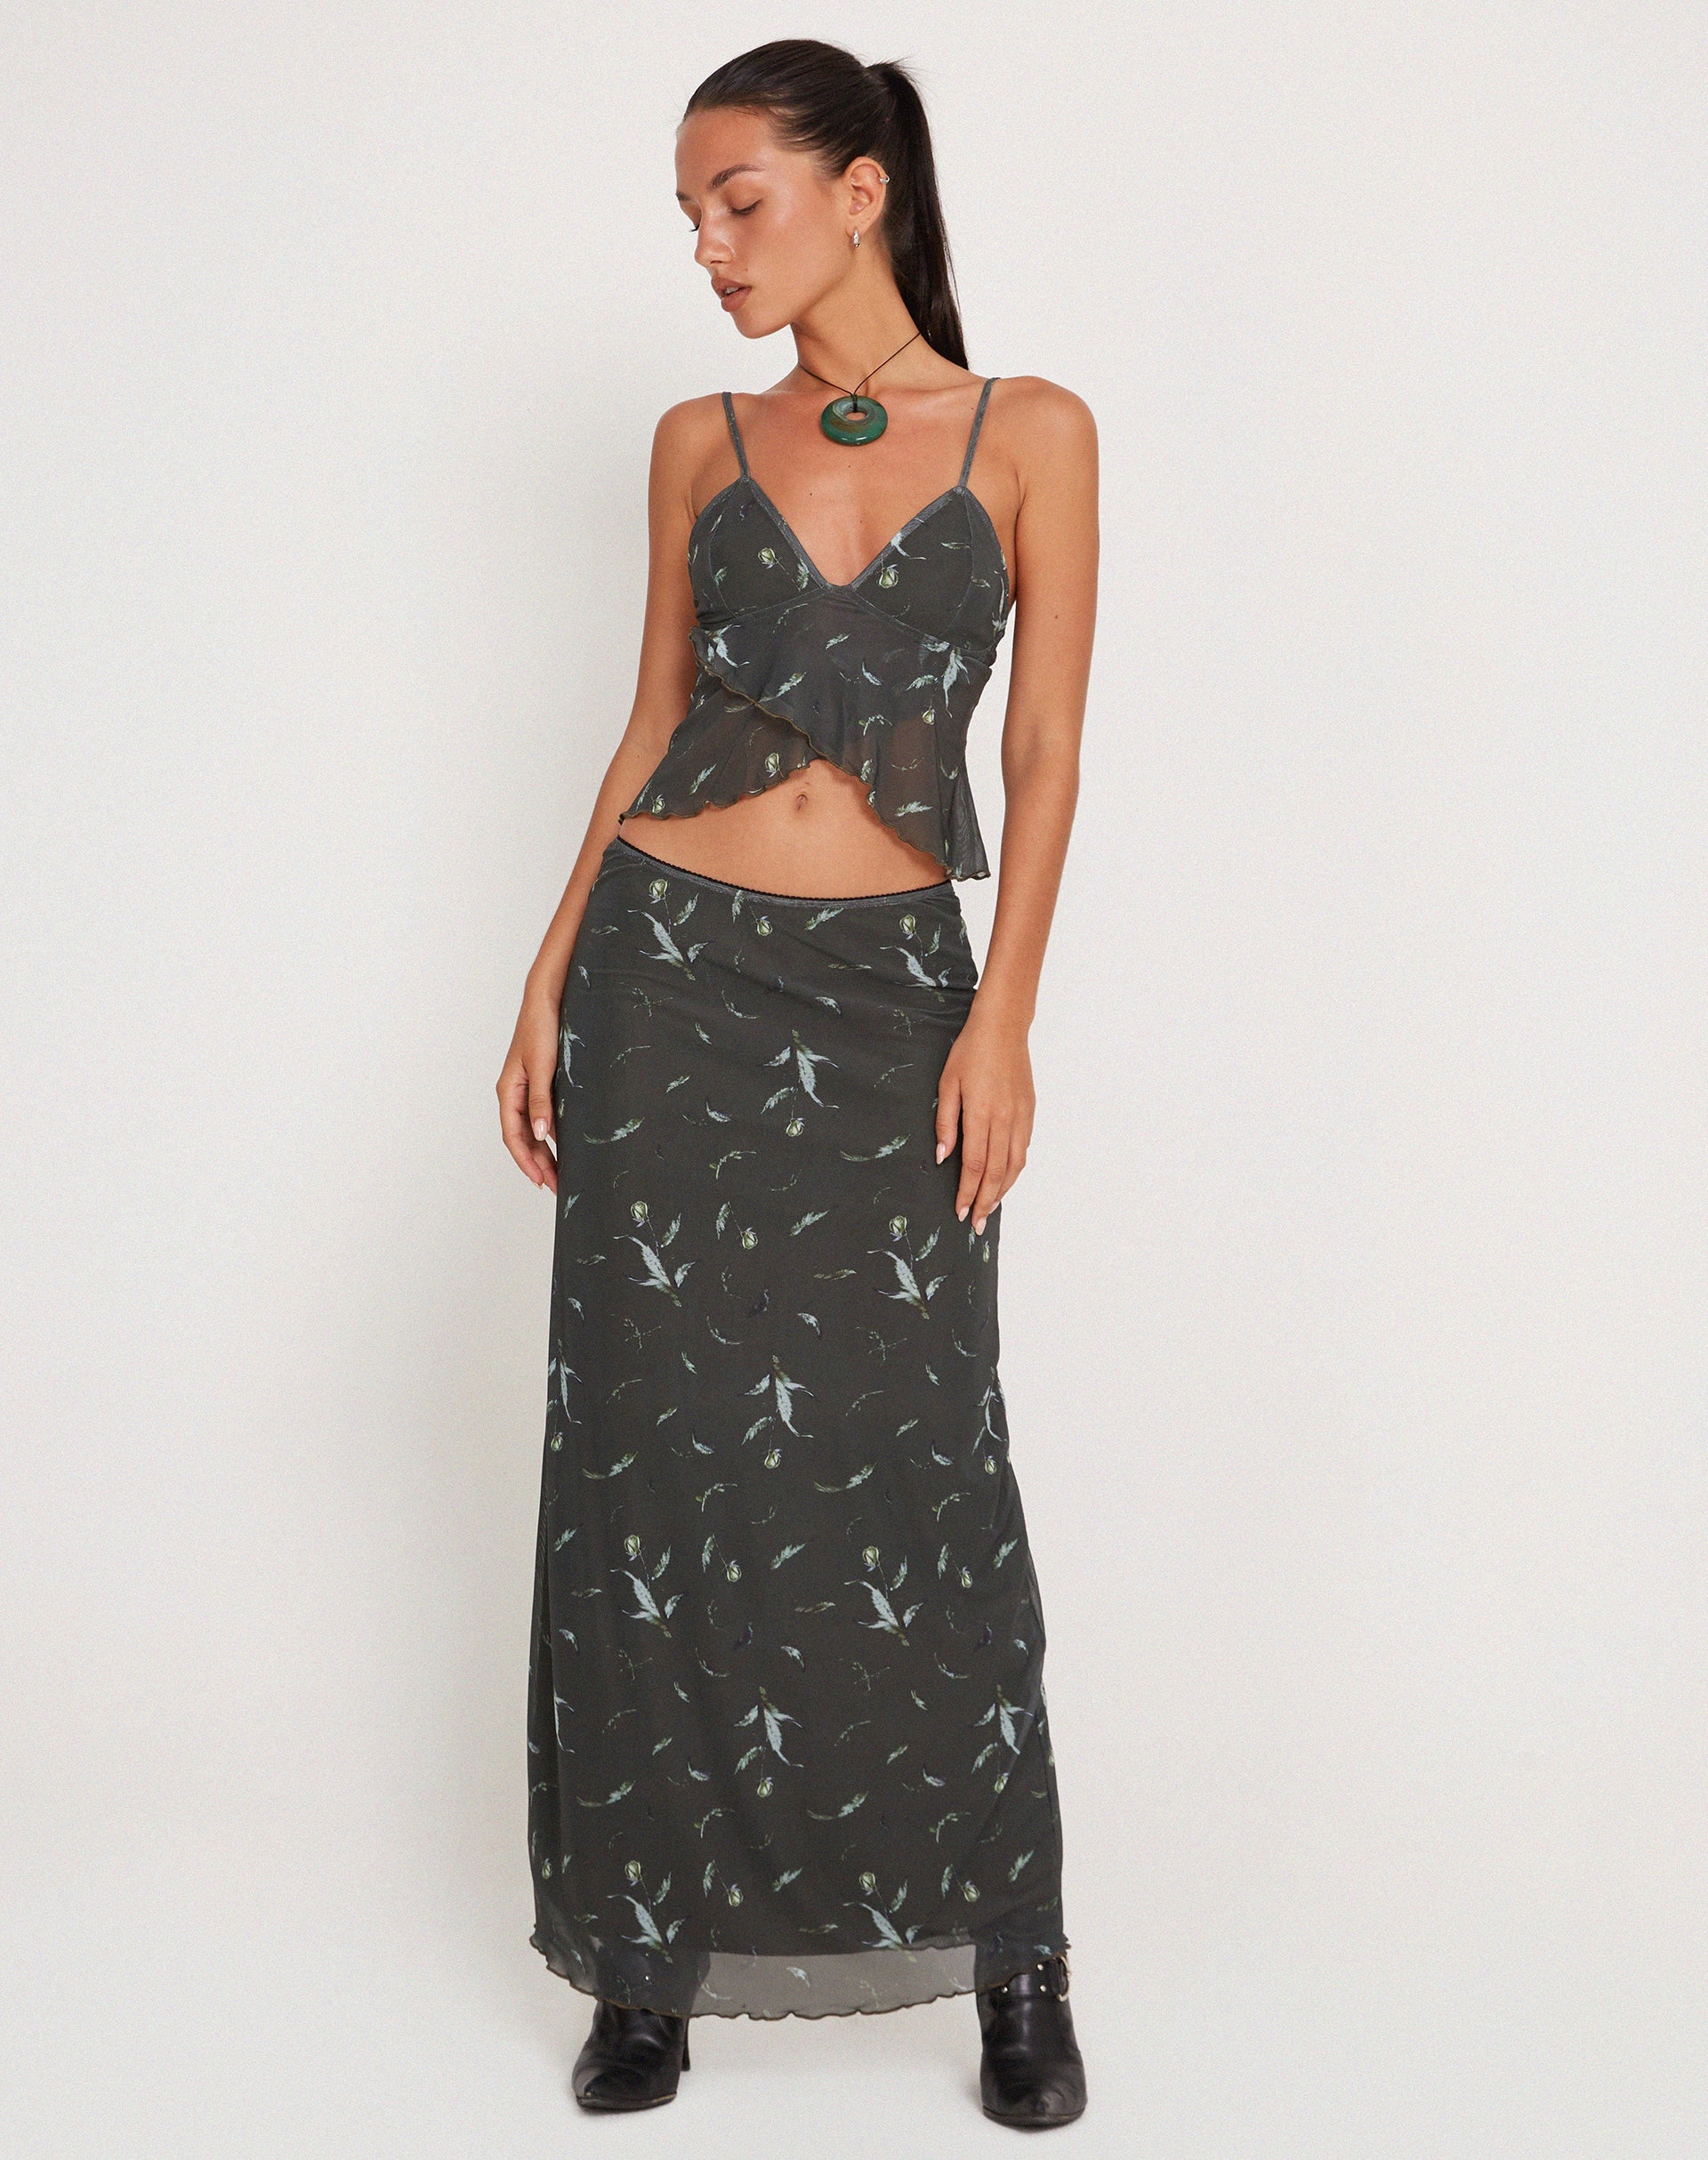 image of Trula Mesh Maxi Skirt in Floral Khaki Silhouette